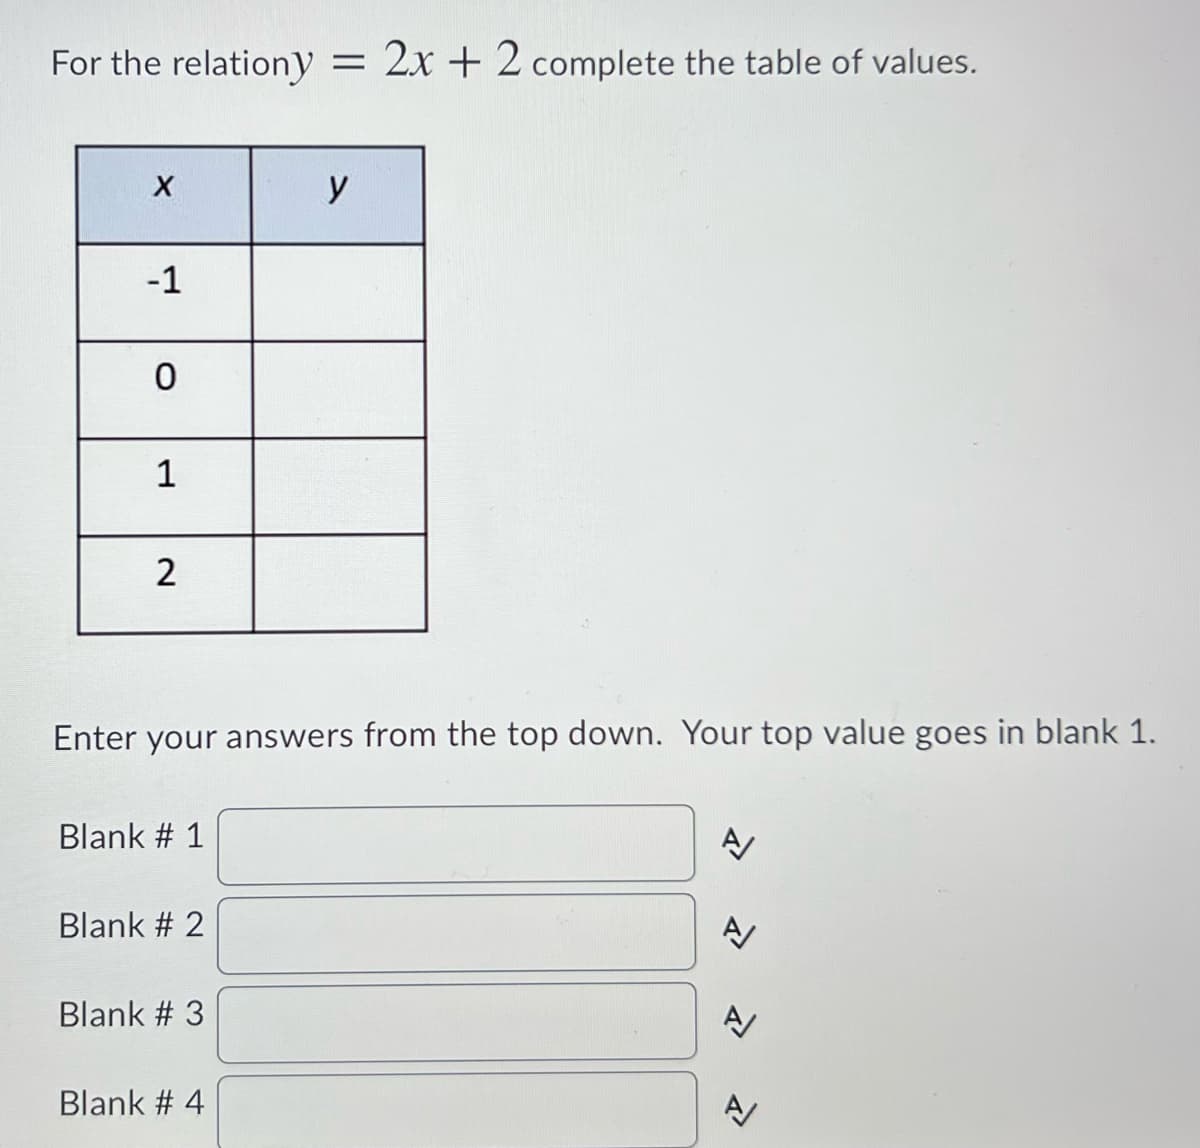 For the relationy = 2x + 2 complete the table of values.
y
-1
1
Enter your answers from the top down. Your top value goes in blank 1.
Blank # 1
Blank # 2
Blank # 3
Blank # 4
